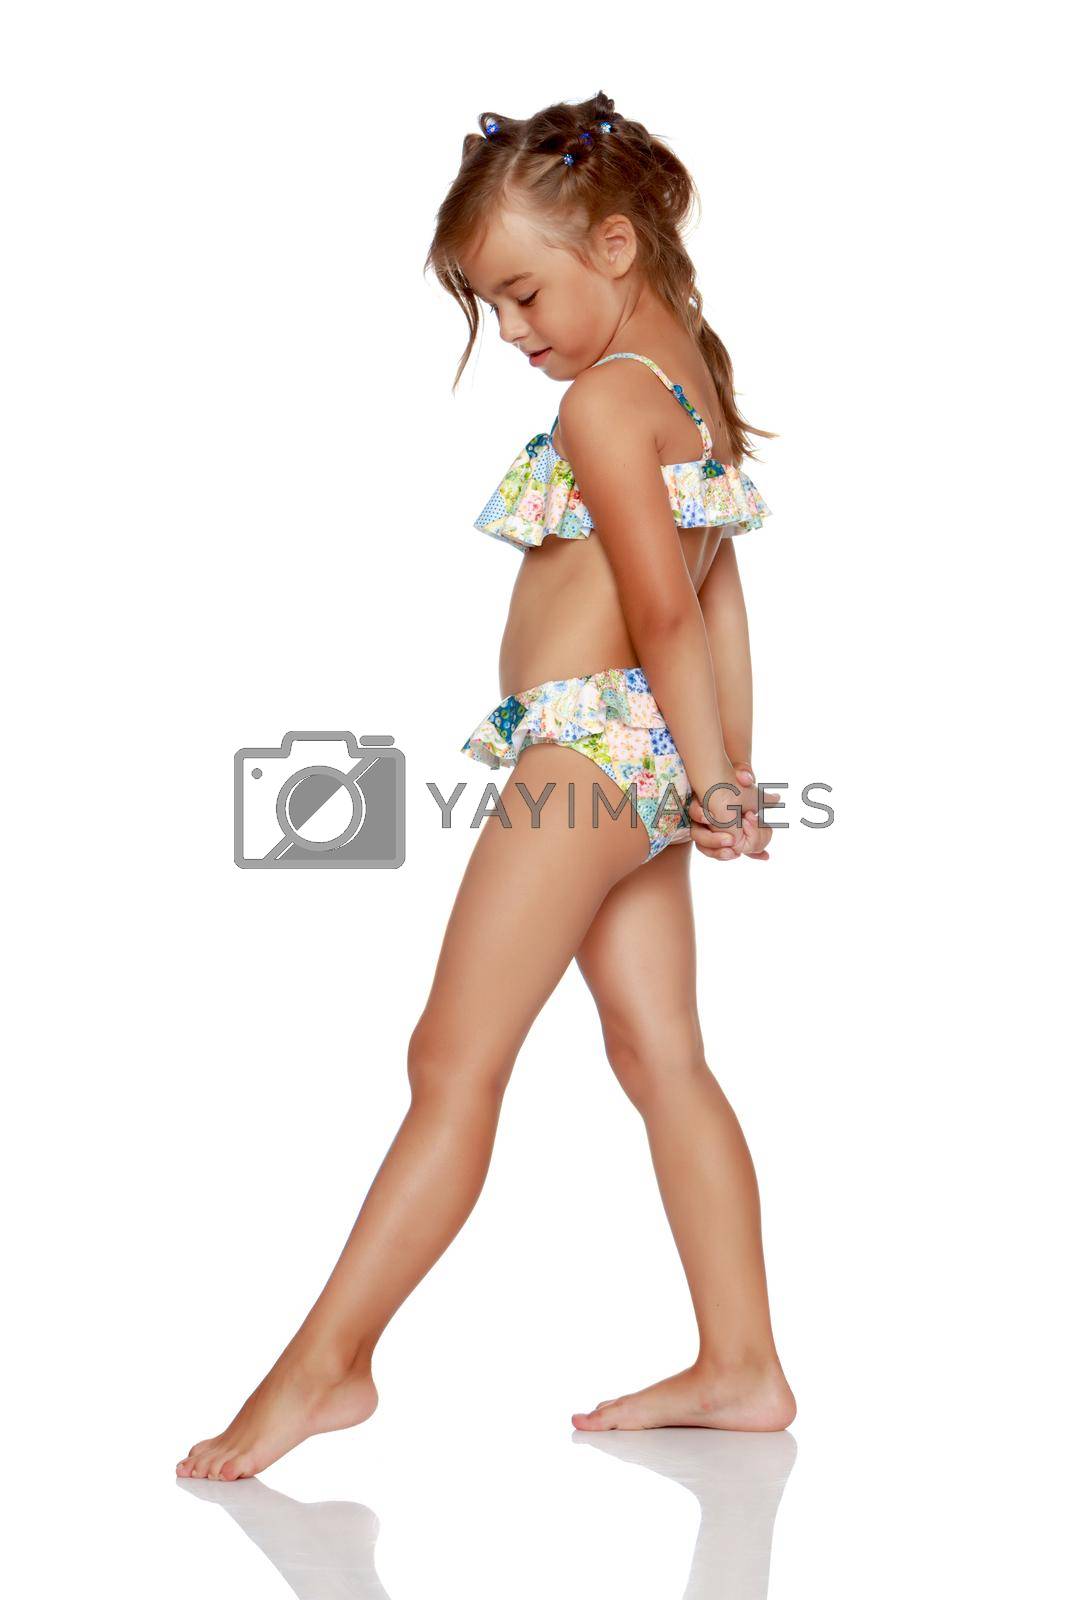 Royalty free image of Tanned little girl in a swimsuit by kolesnikov_studio